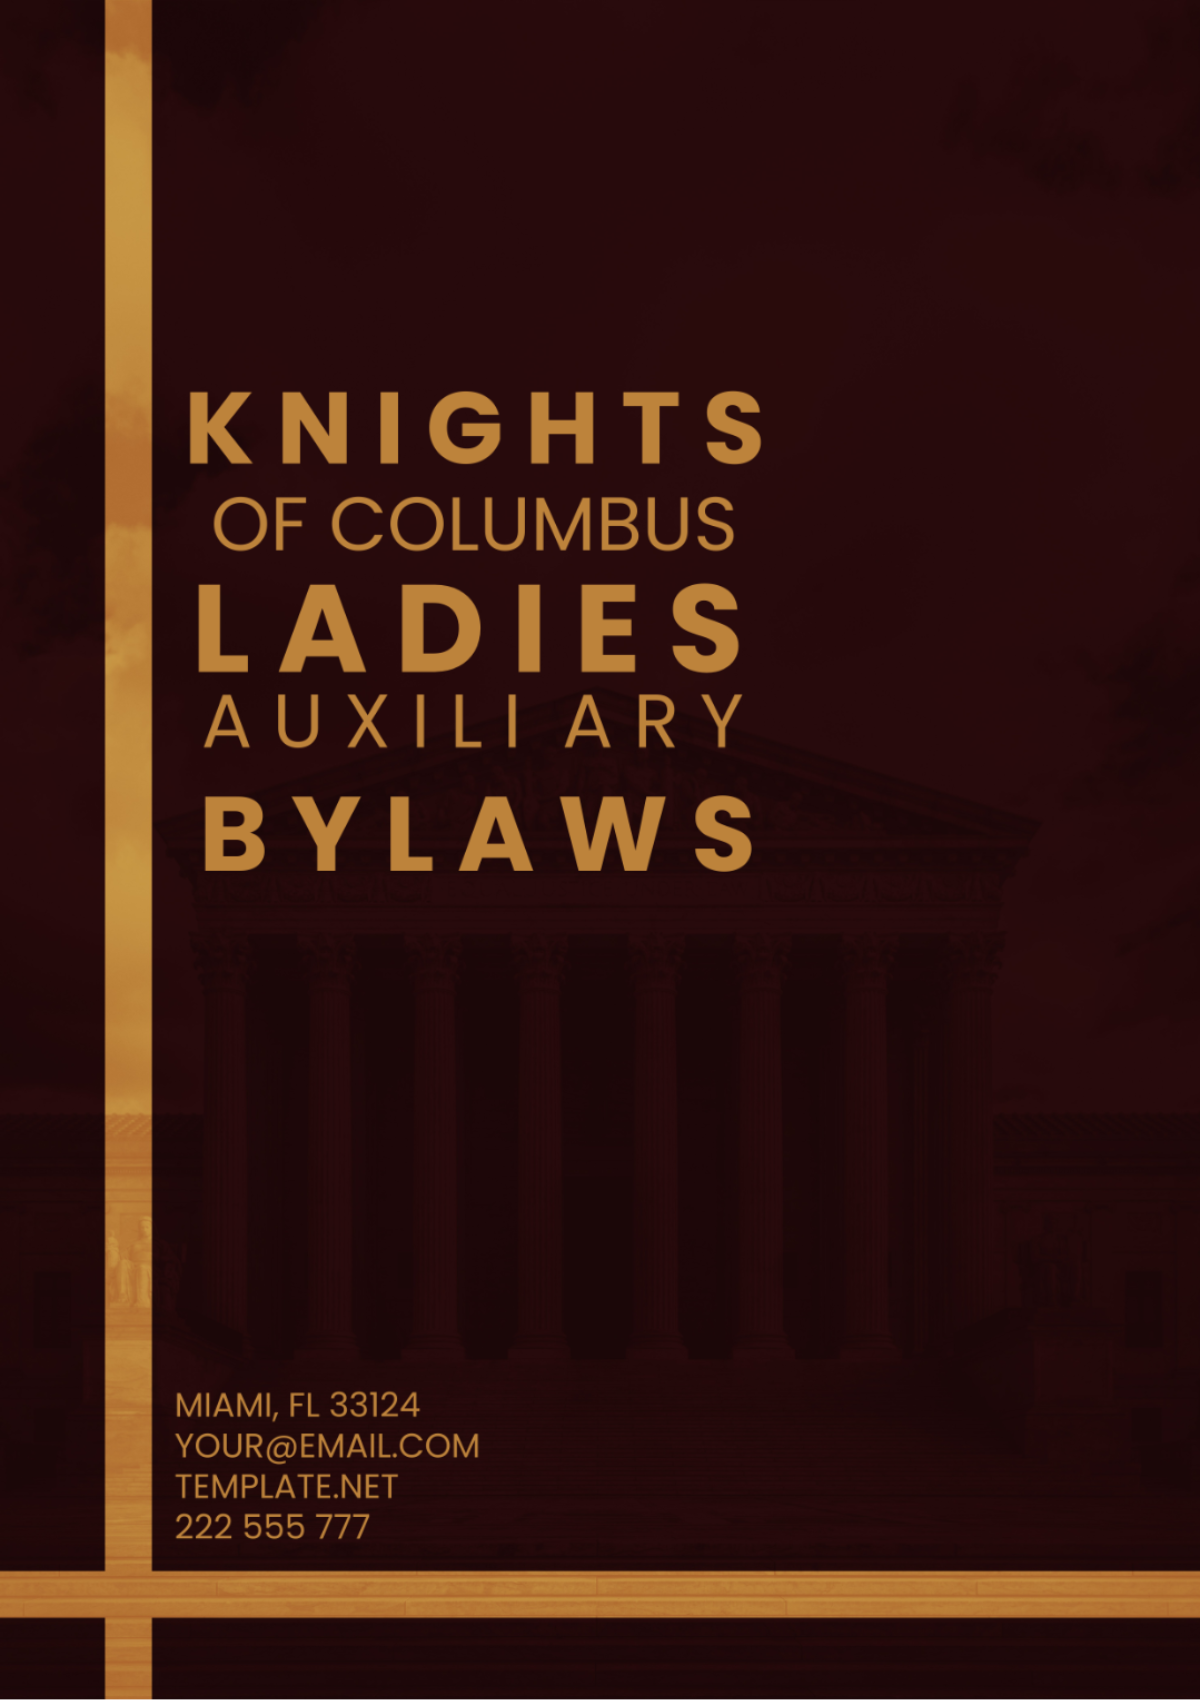 Knights Of Columbus Ladies Auxiliary Bylaws Template